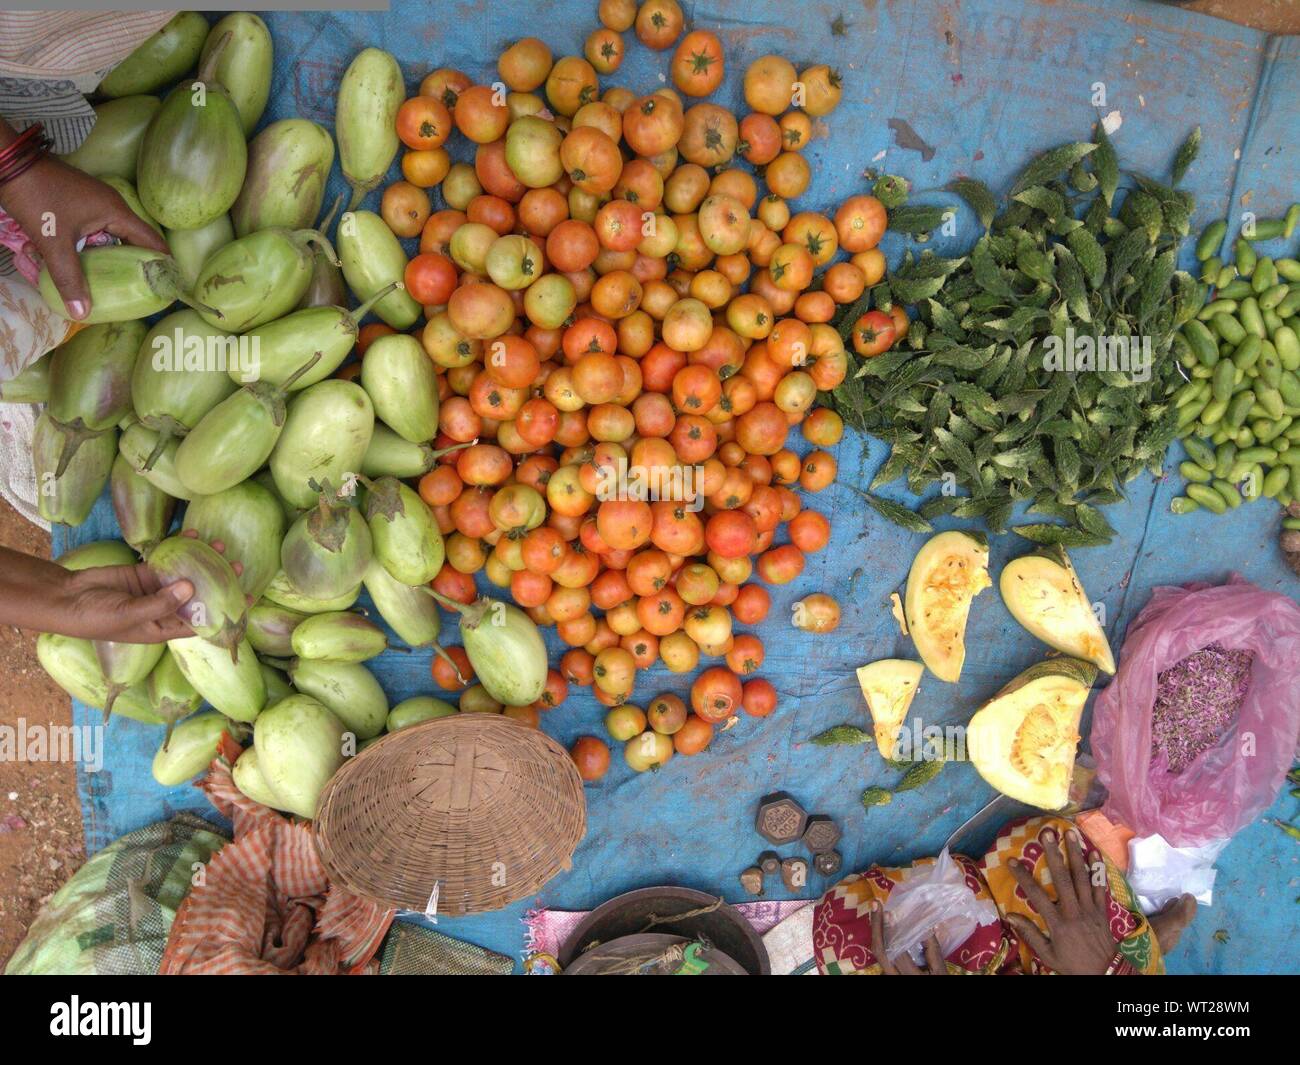 Cropped Image Of Vendor And Buyer By Vegetables At Market Stock Photo